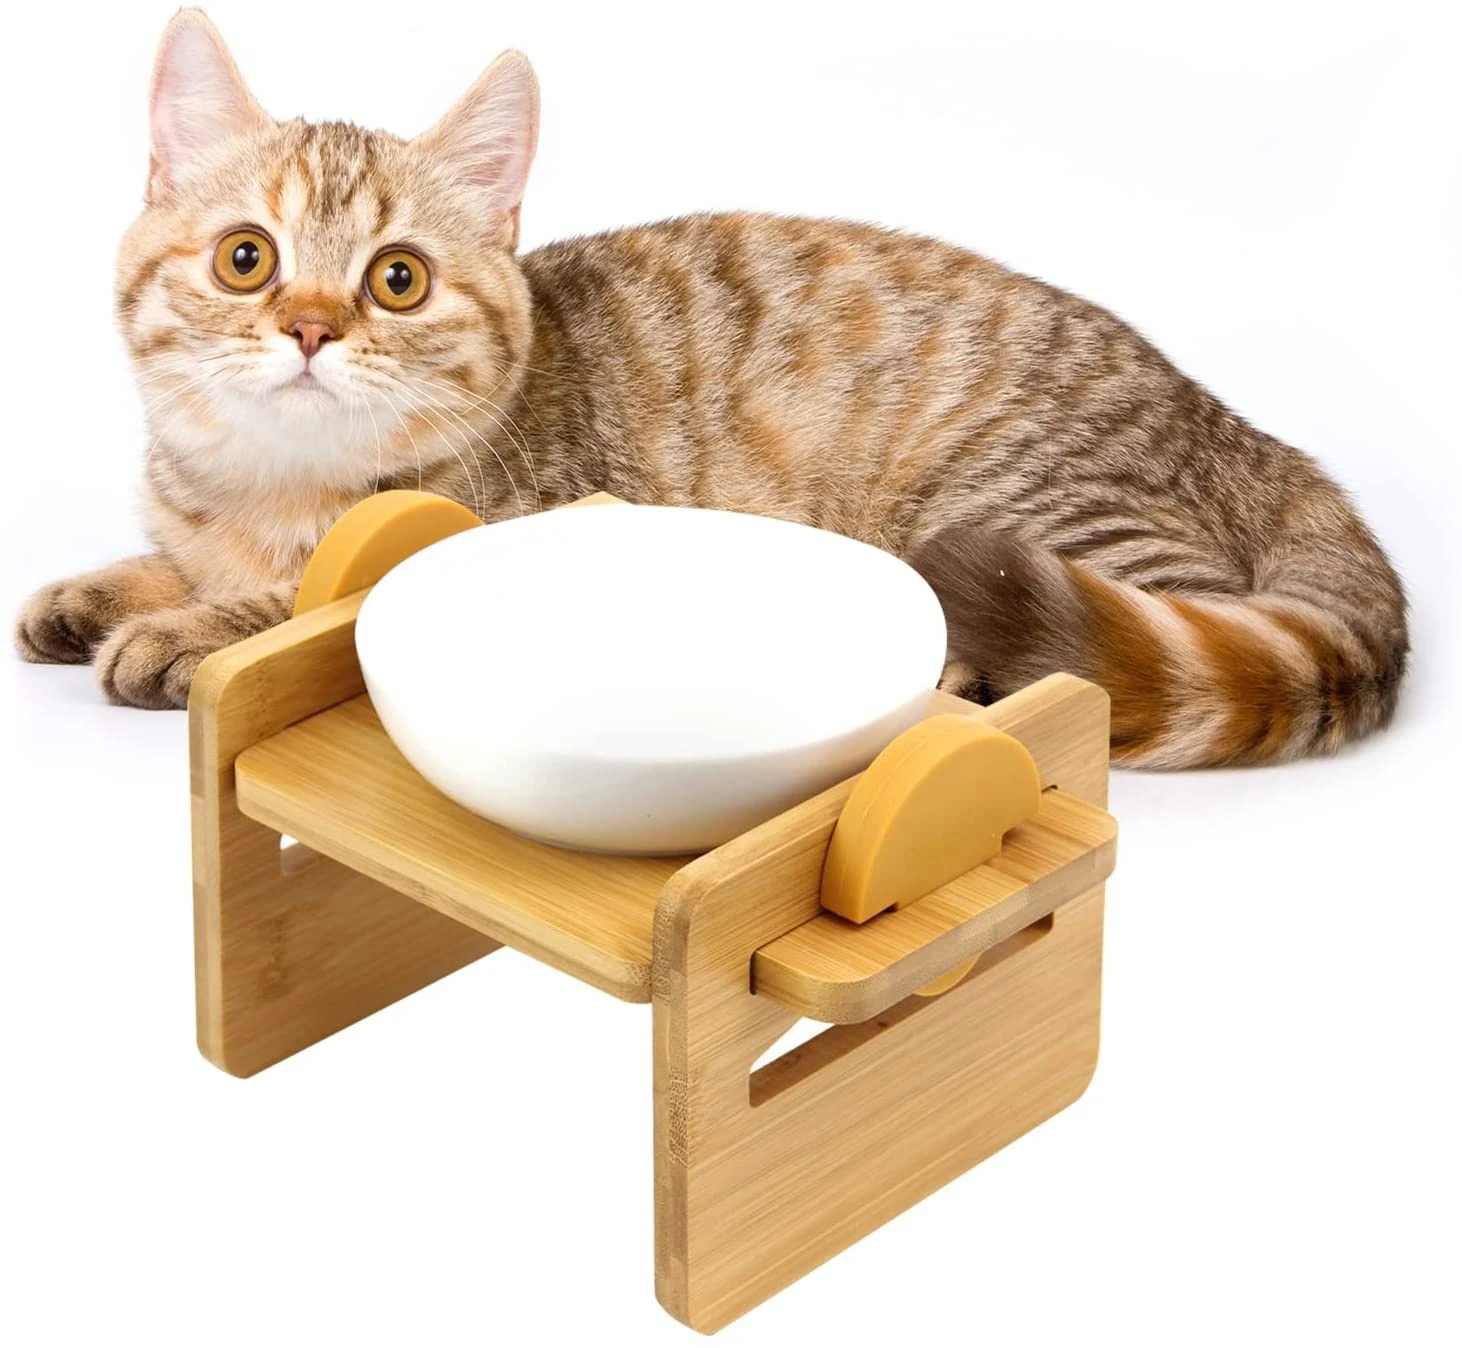 

6 oz Elevated Dog Bowls,Adjustable Ceramic Pet Bowl,15°Tilted Raised Pet Feeder,Durable and Nonslip Bamboo Drinking Bowl pets